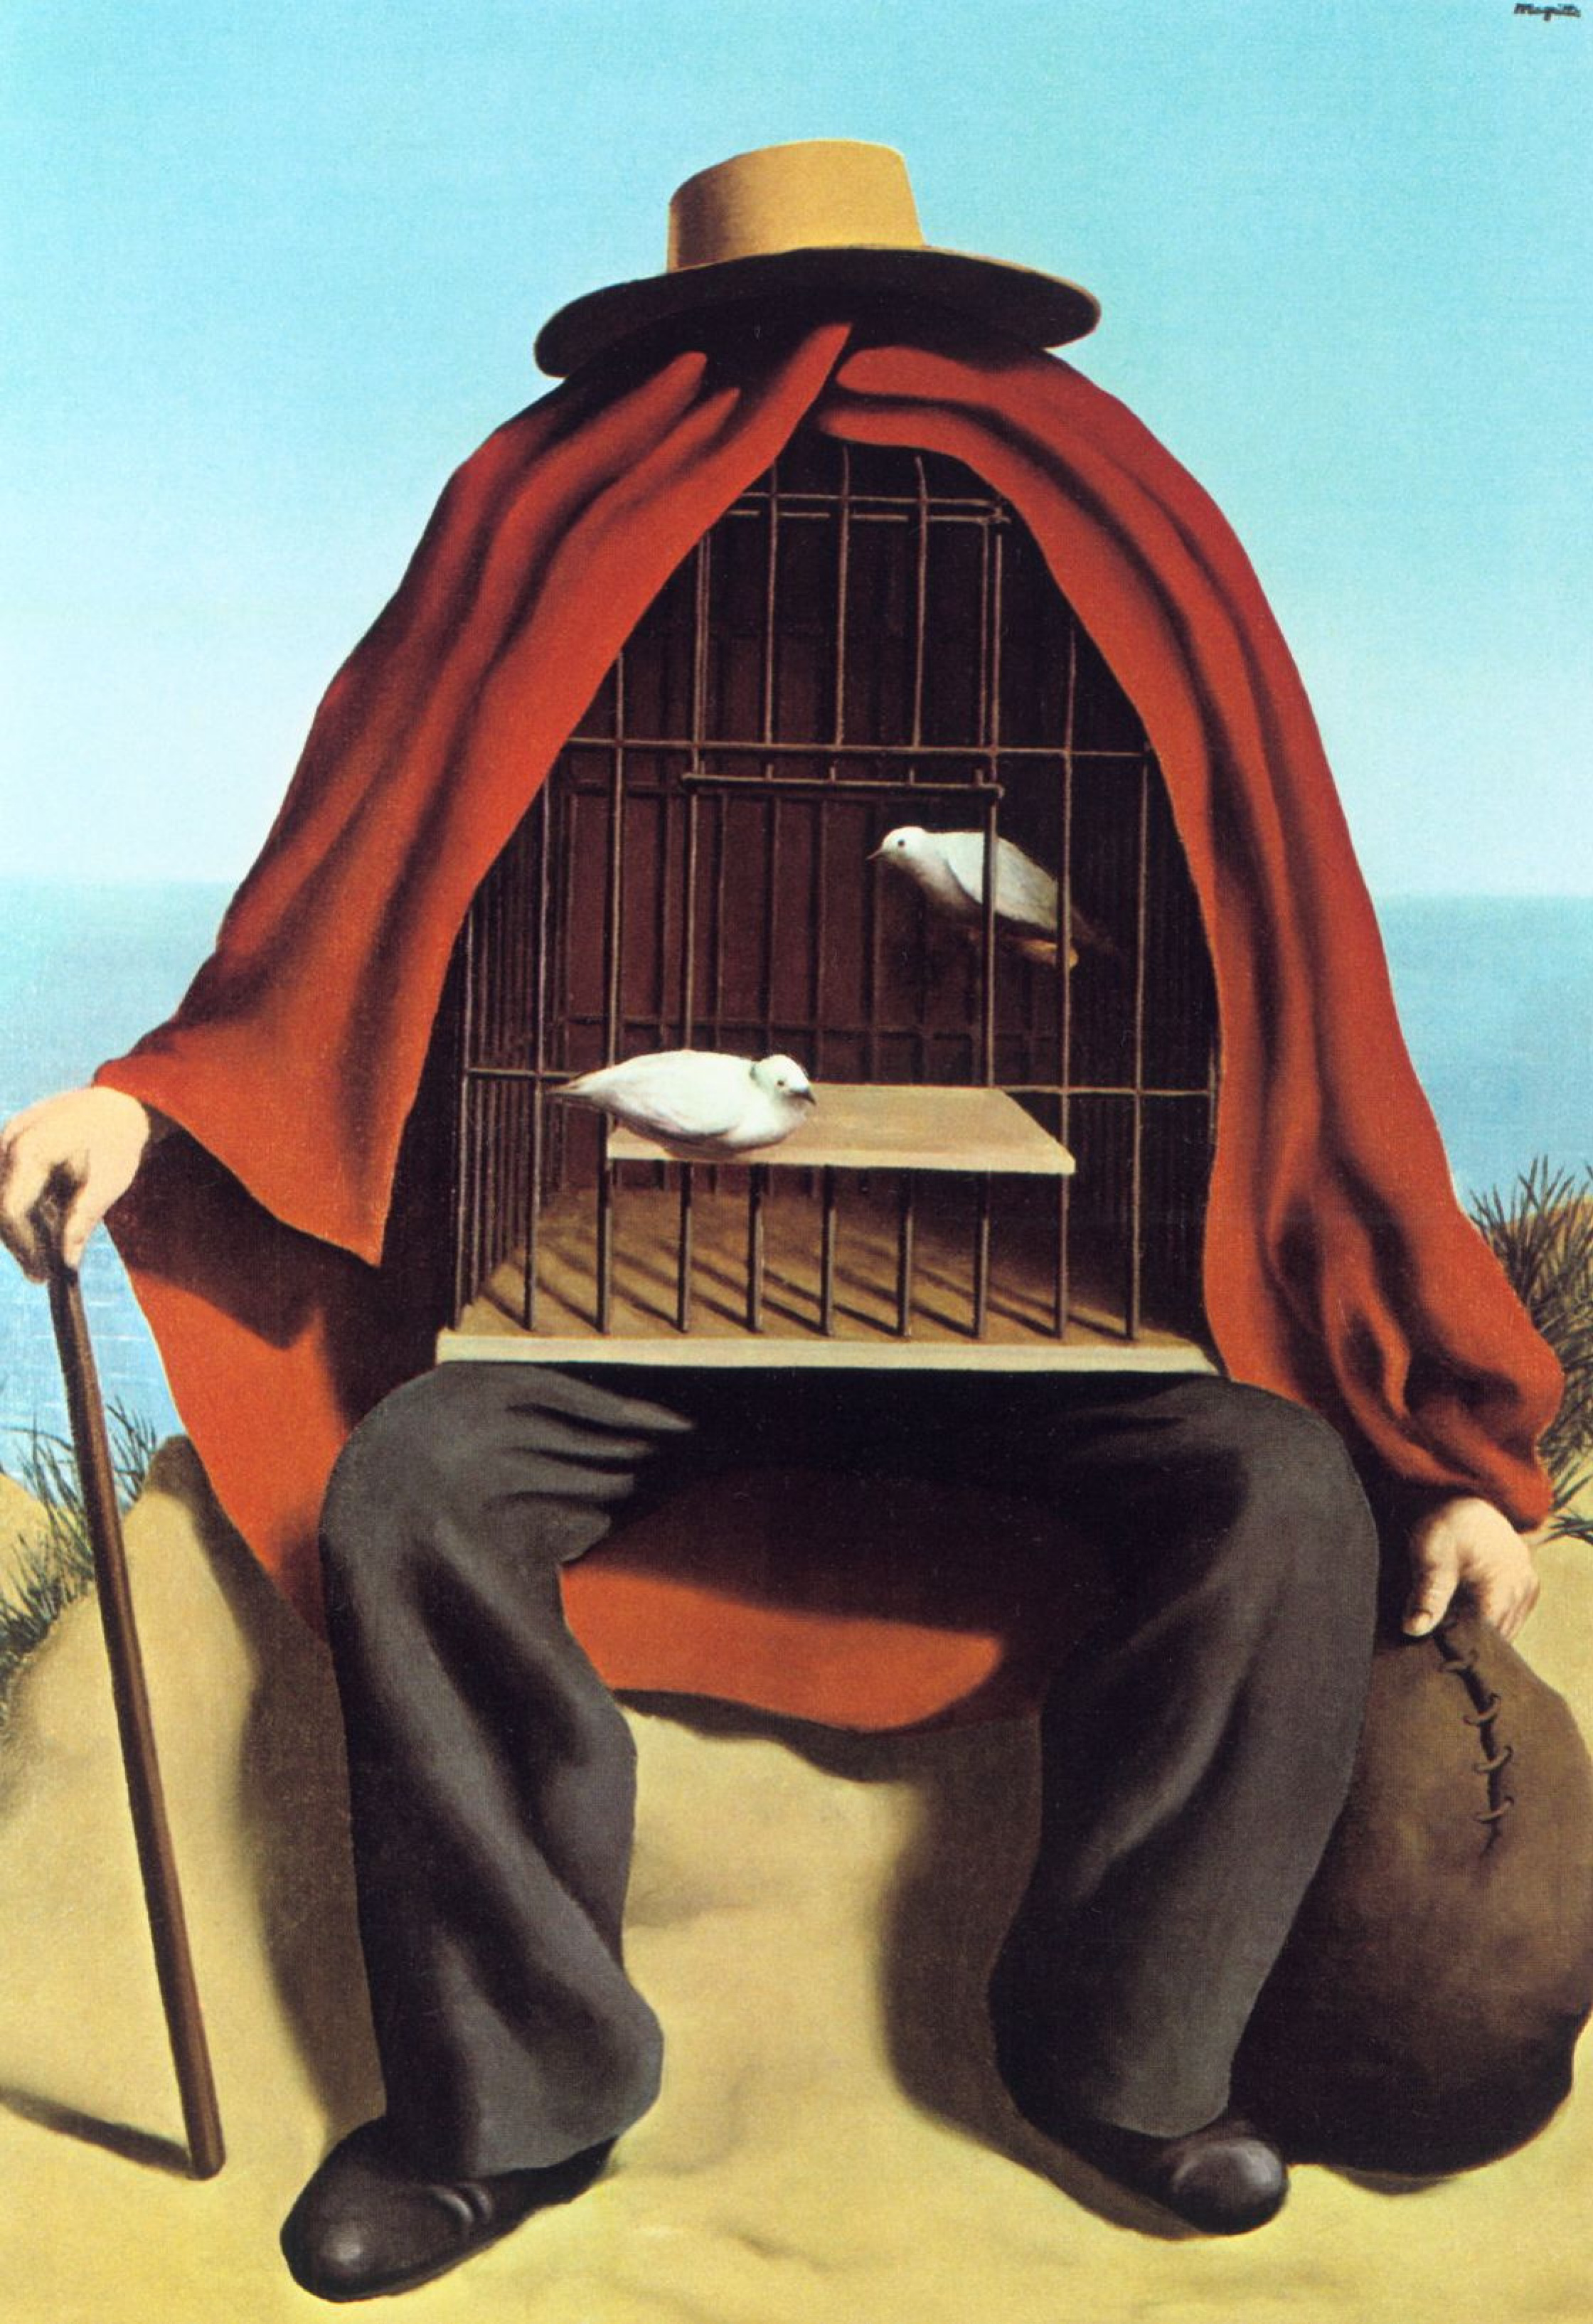 Therapist by René Magritte - History, Works, Analysis & Facts